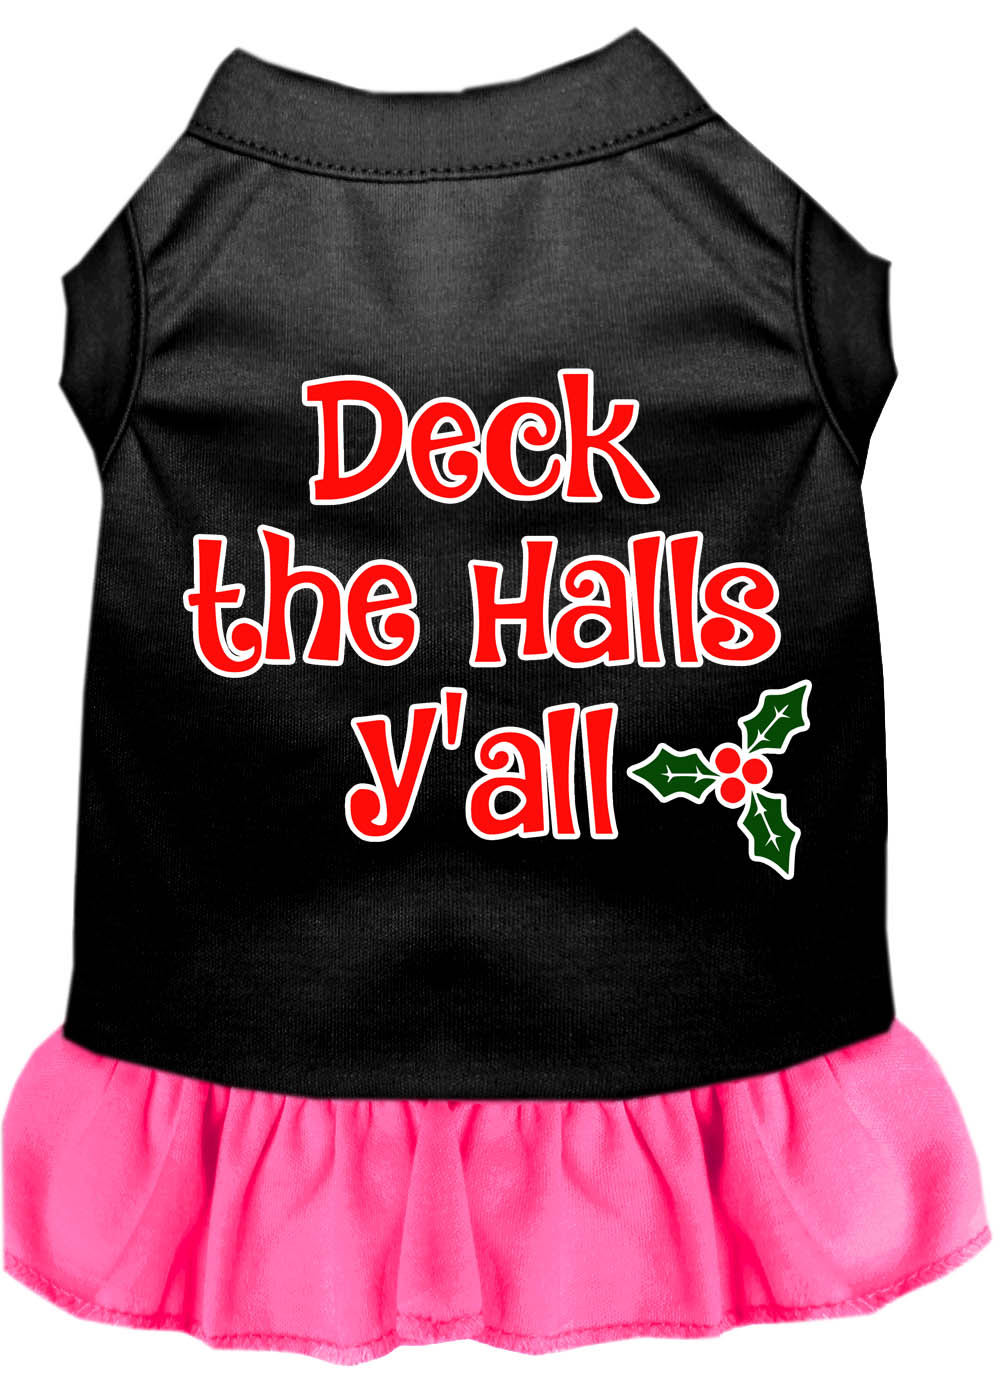 Deck the Halls Y'all Screen Print Dog Dress Black with Bright Pink XS